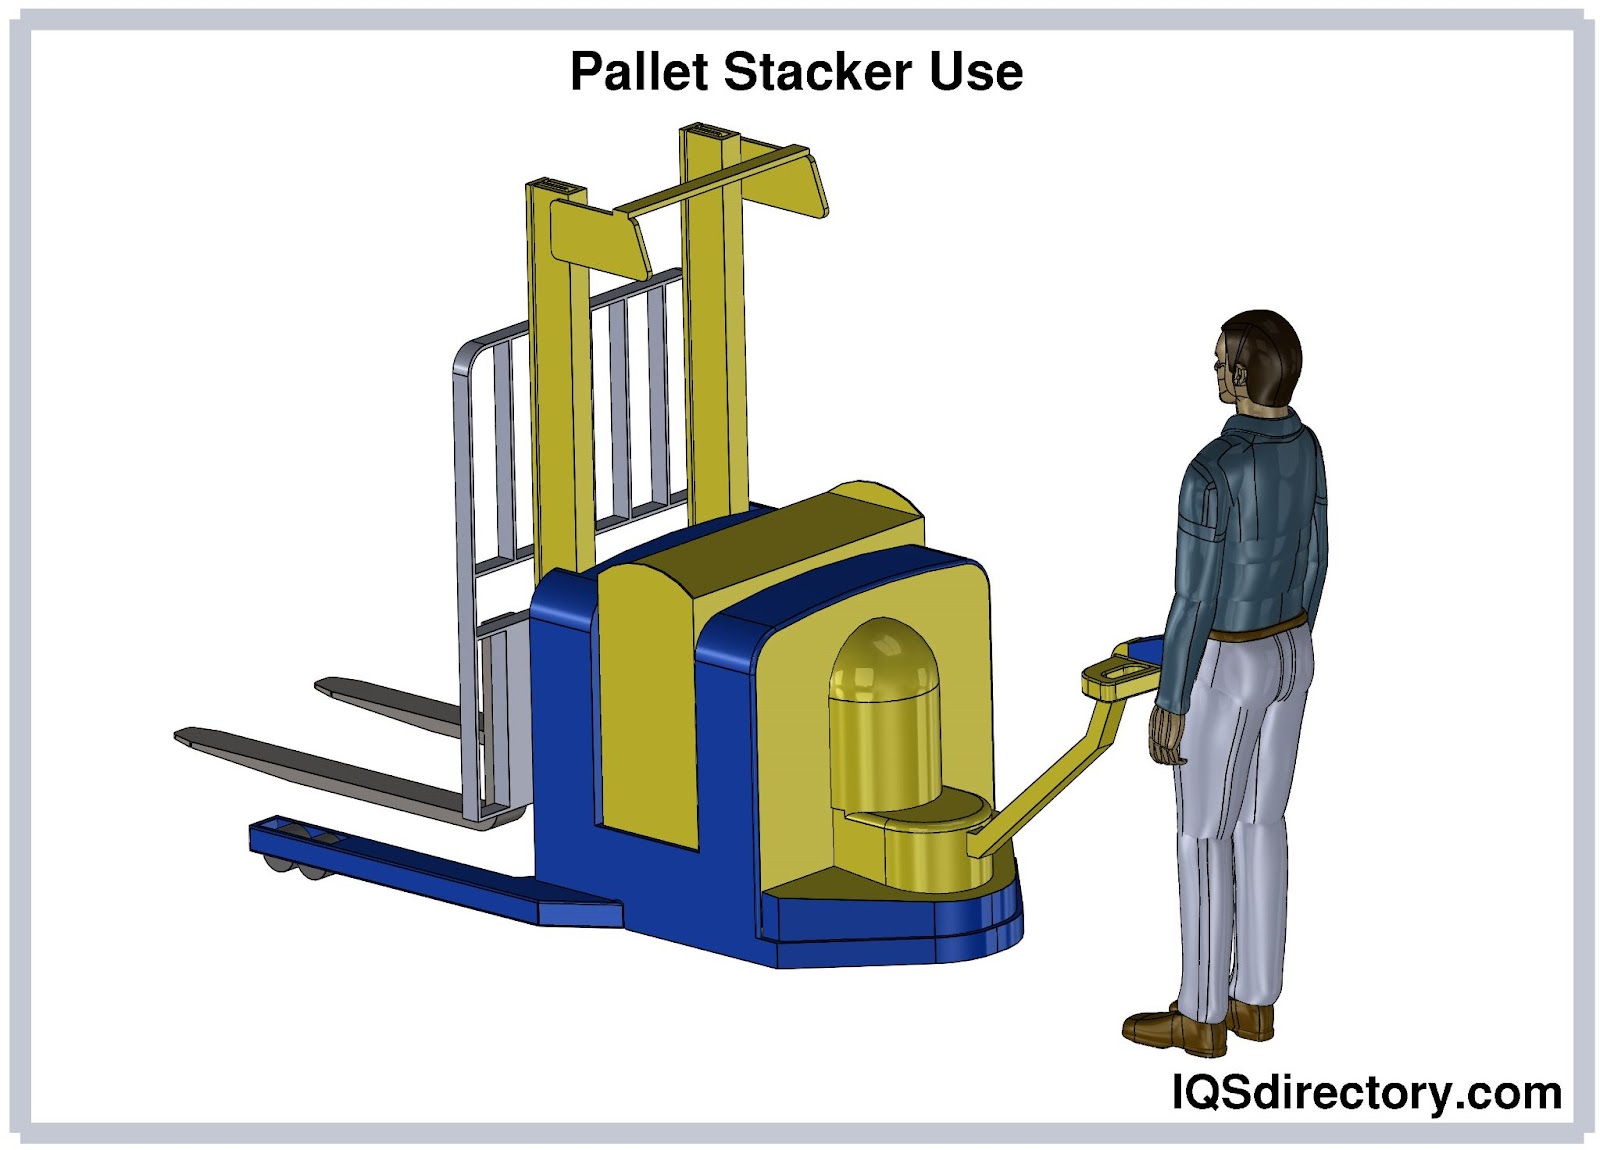 Pallet Stacker Use